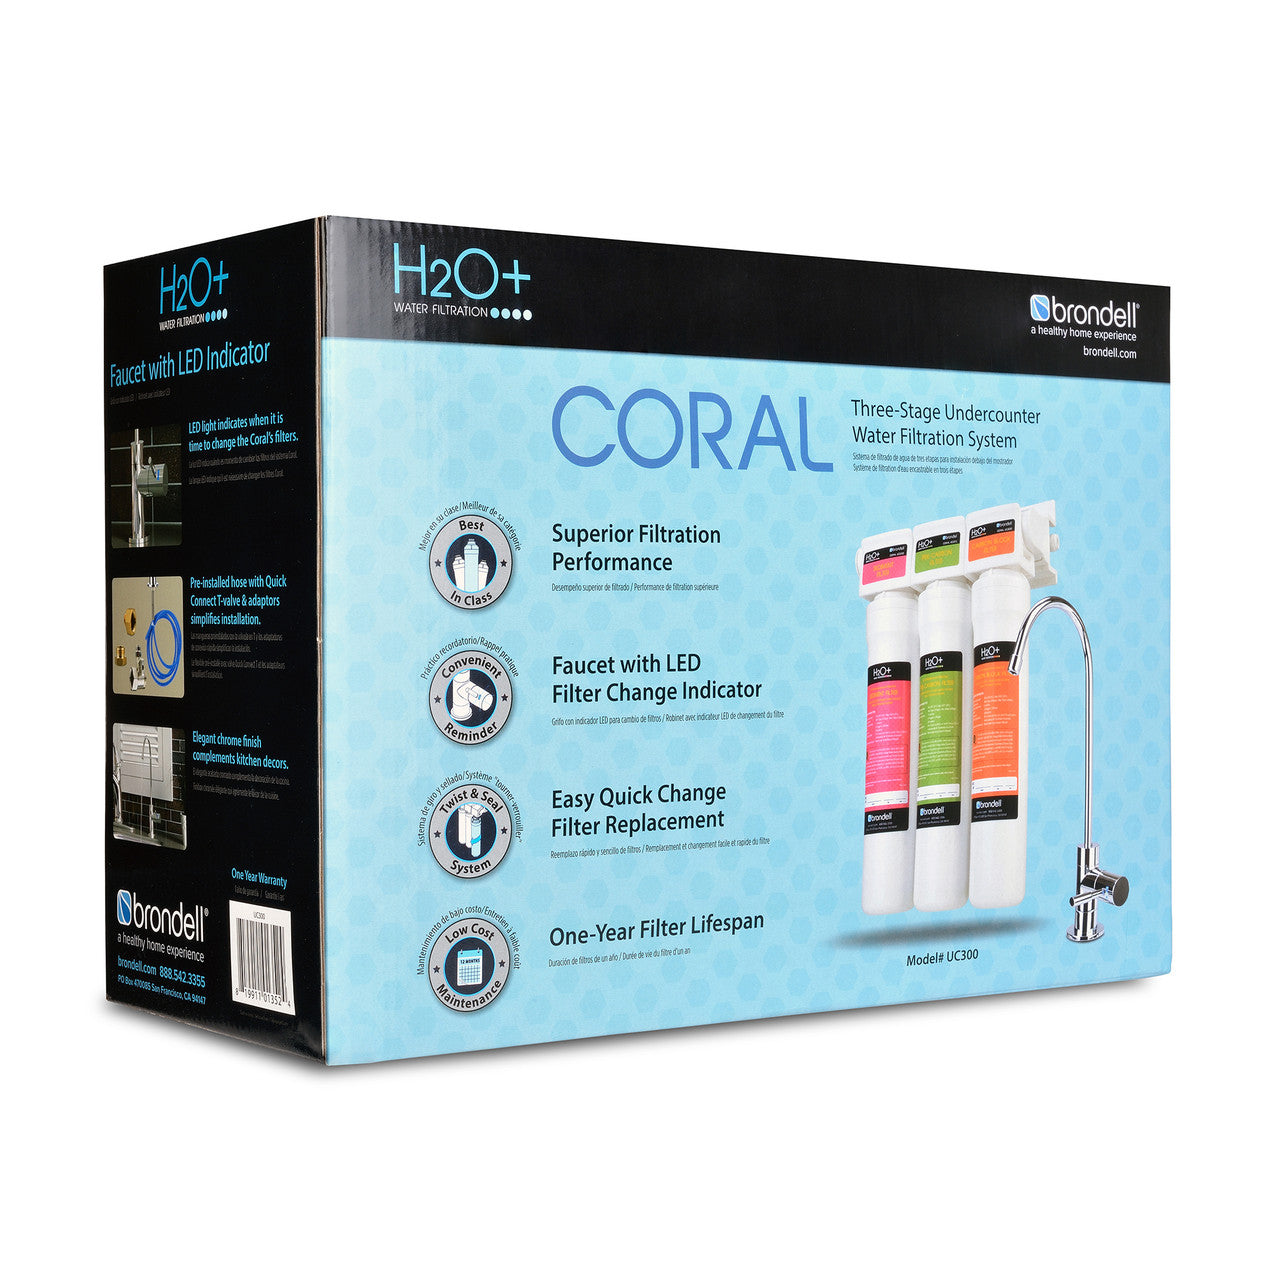 H2O+ Coral Three-Stage Undercounter Water Filtration System with Over 99% Lead Reduction